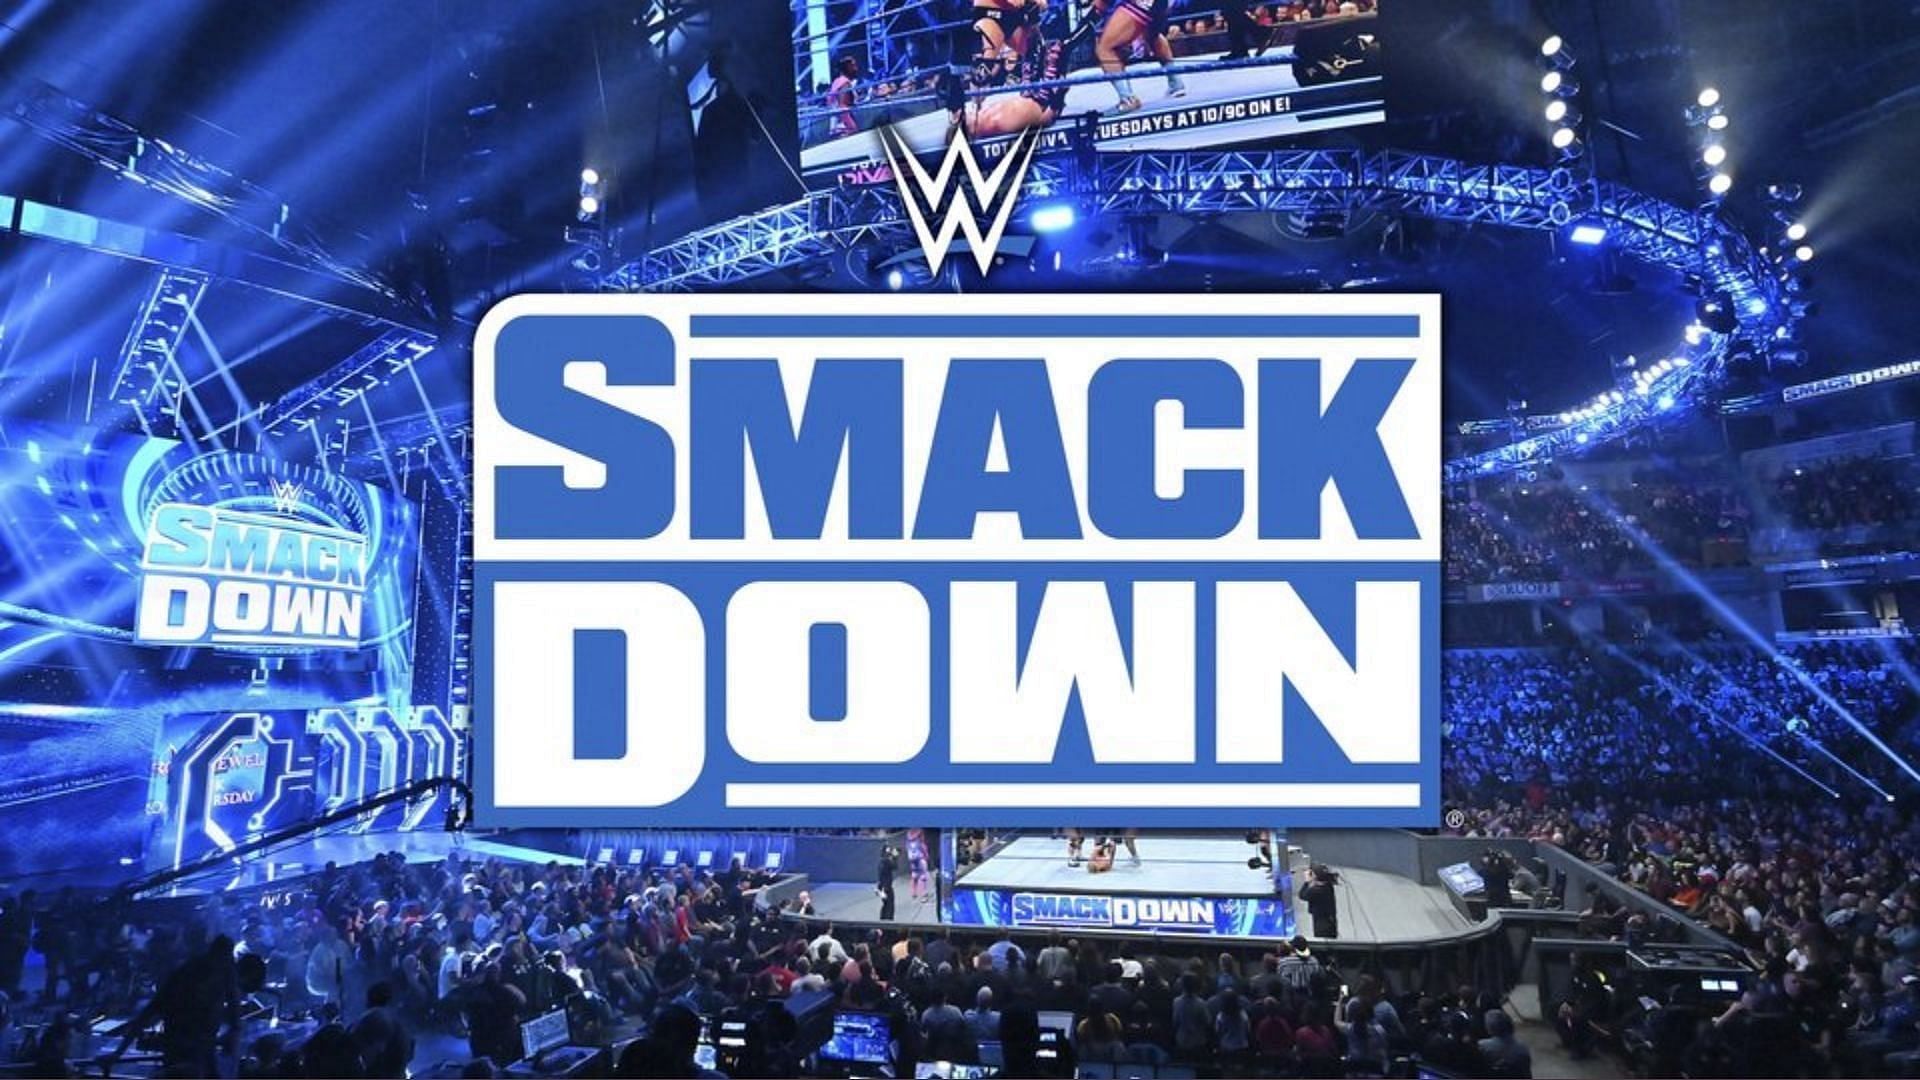 SmackDown is the 2nd longest running weekly episodic television show